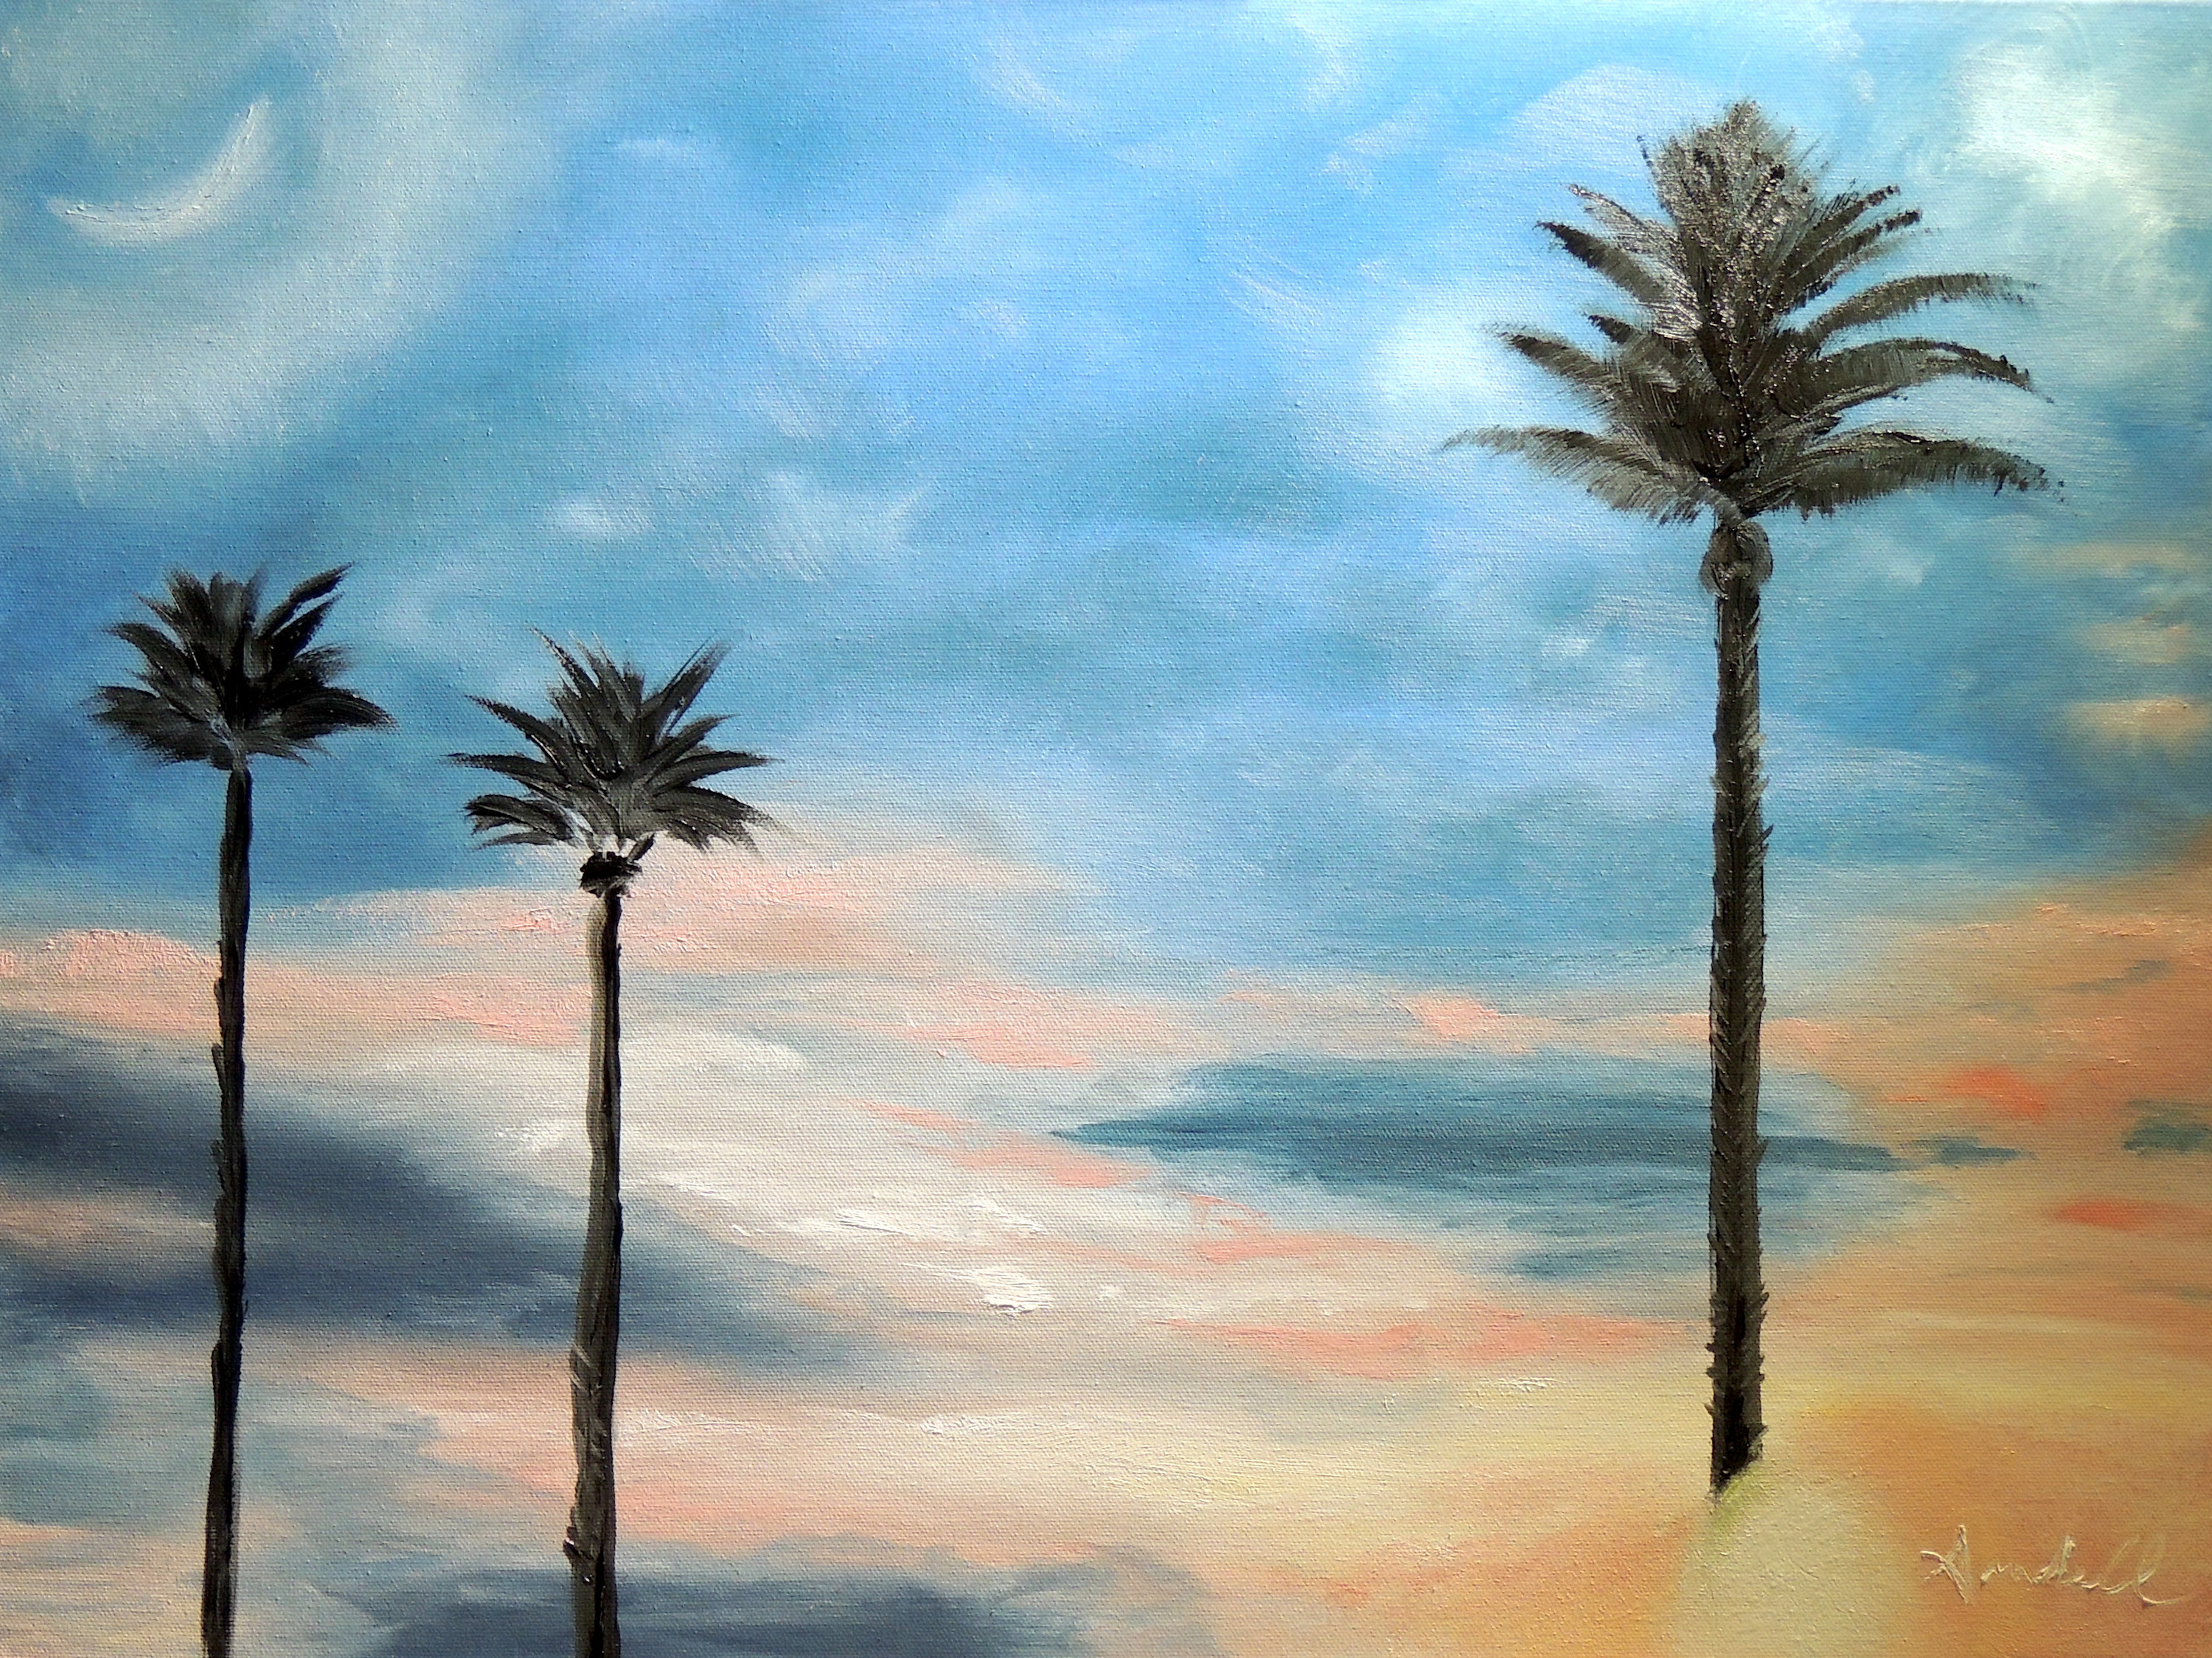 Palms with crescent moon uhdm7x